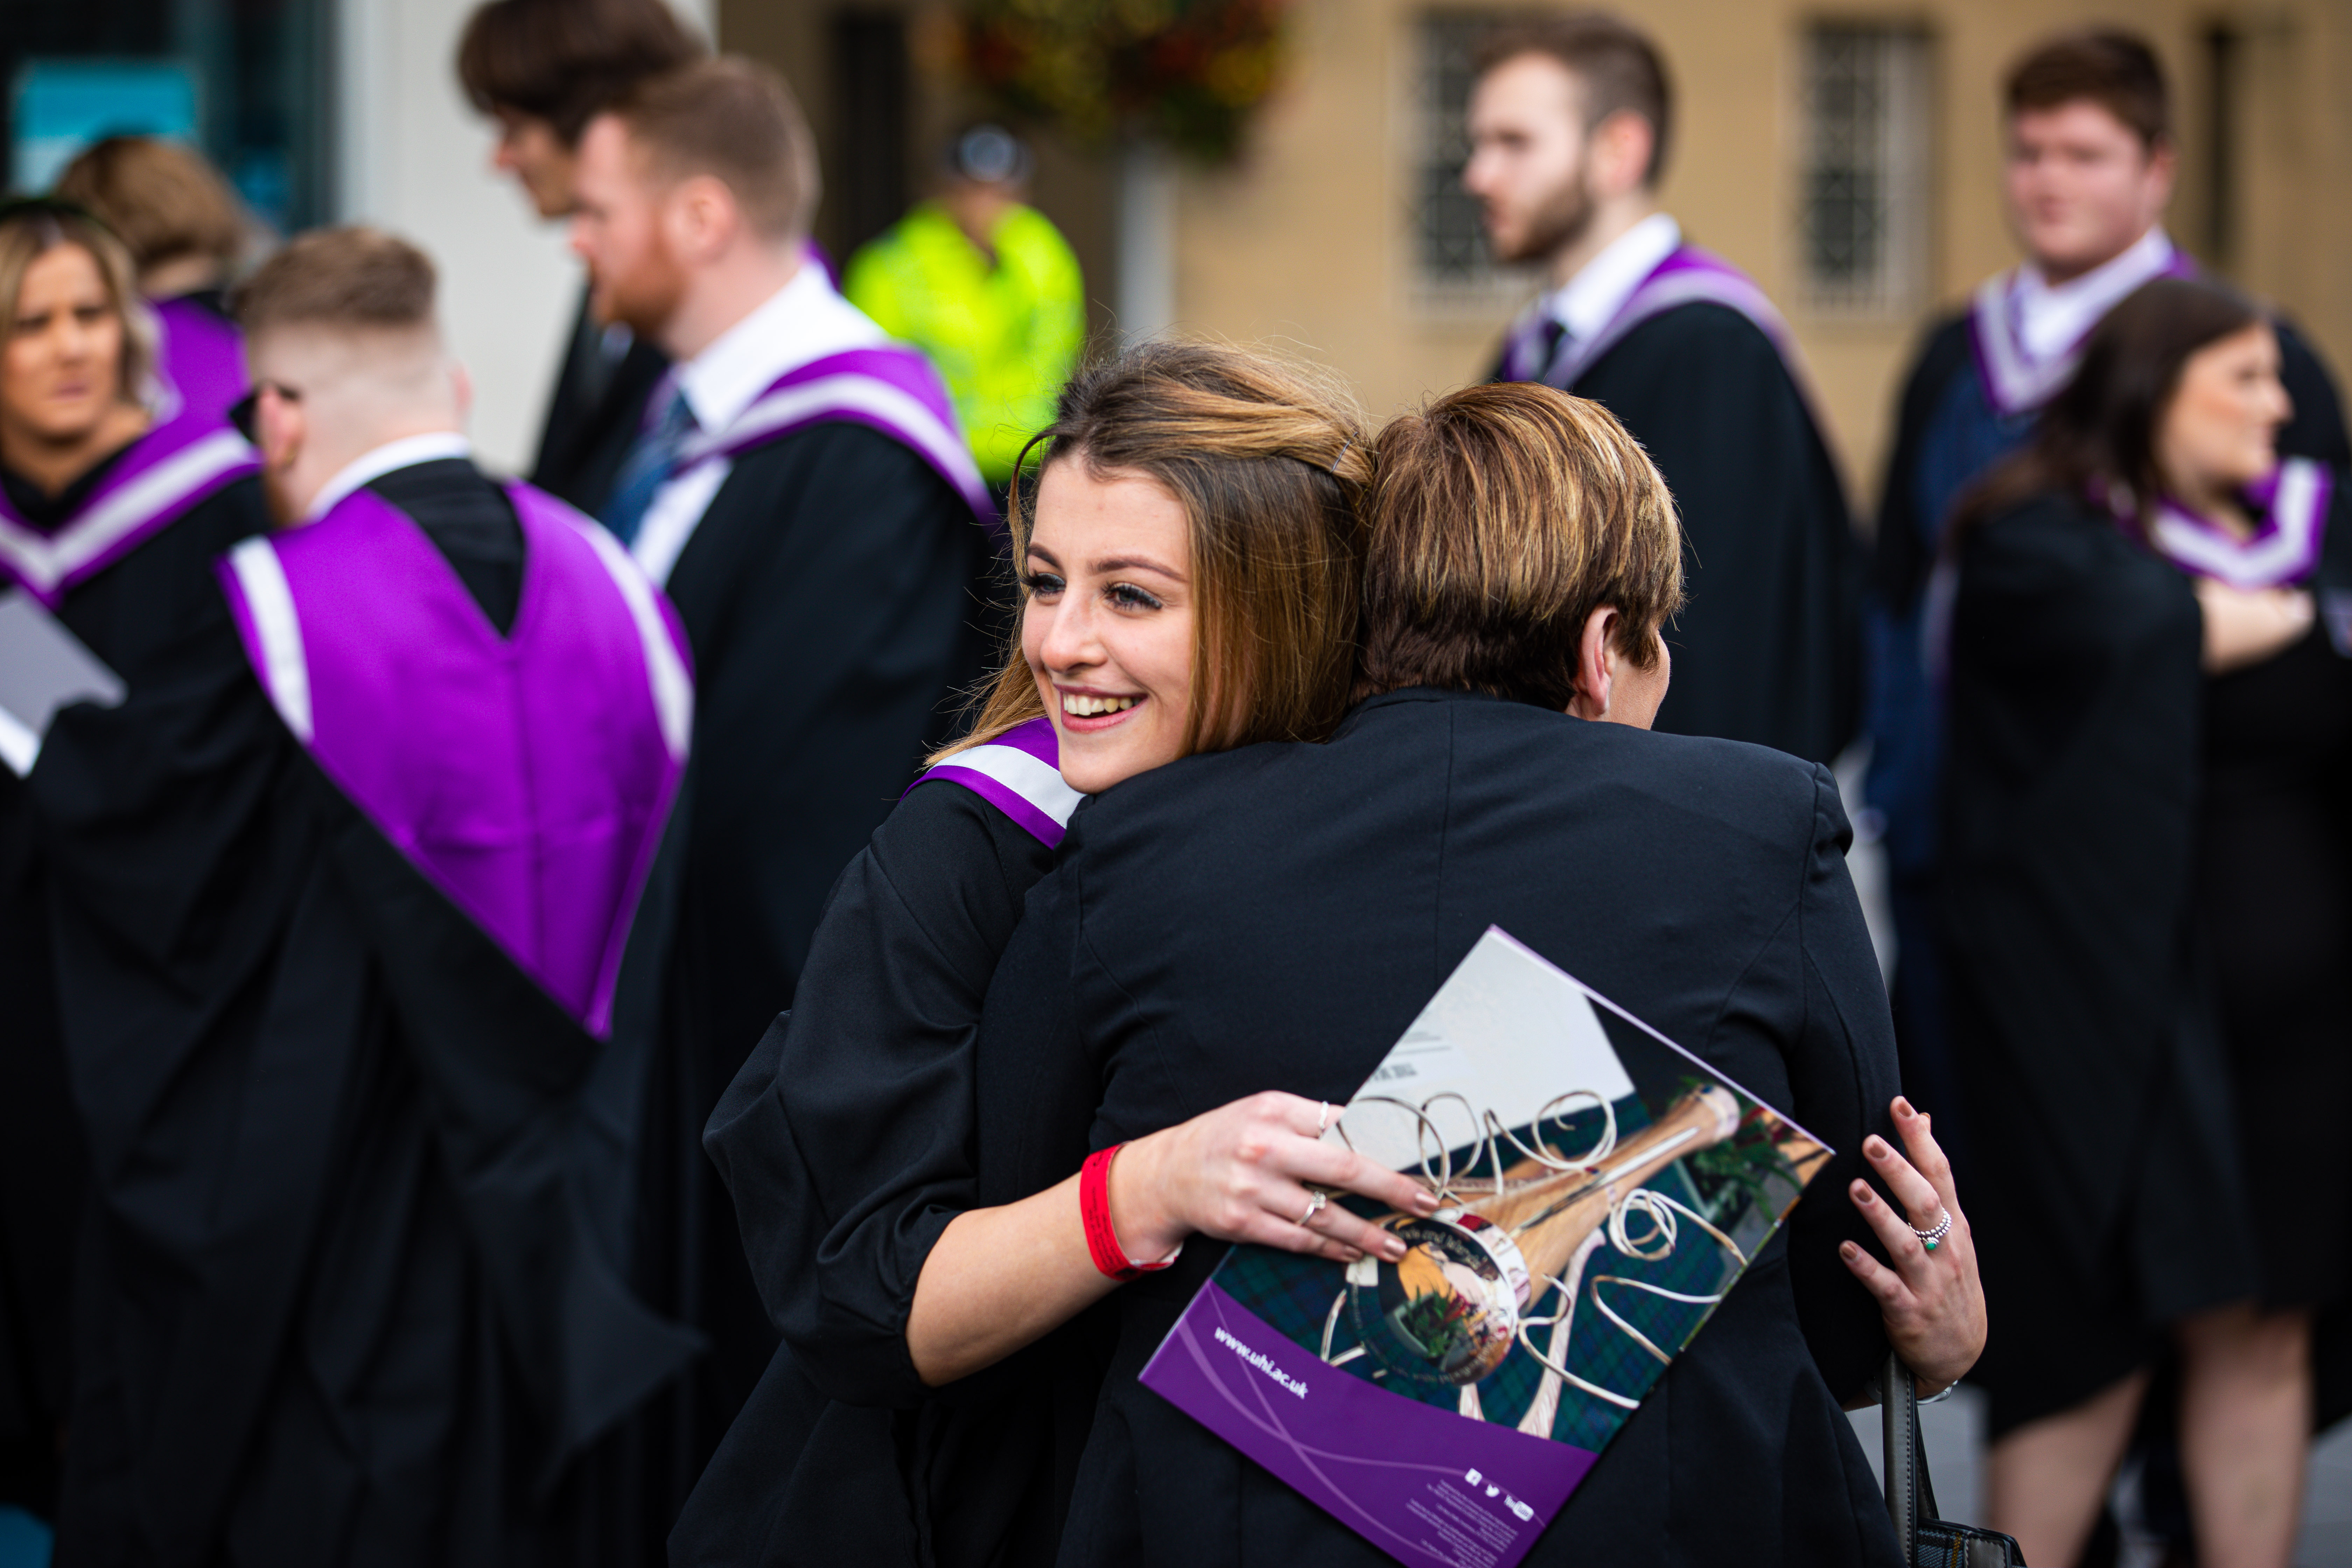 Courier News - Perth - Jamie Buchan - Perth University Graduation Day - CR0014814 - Perth - Picture Shows: Students waiting to be called for Graduation Ceremony at Perth Concert Hall, but there is always time for a cuddle - Thursday 3rd October 2019 - Steve Brown / DCT Media